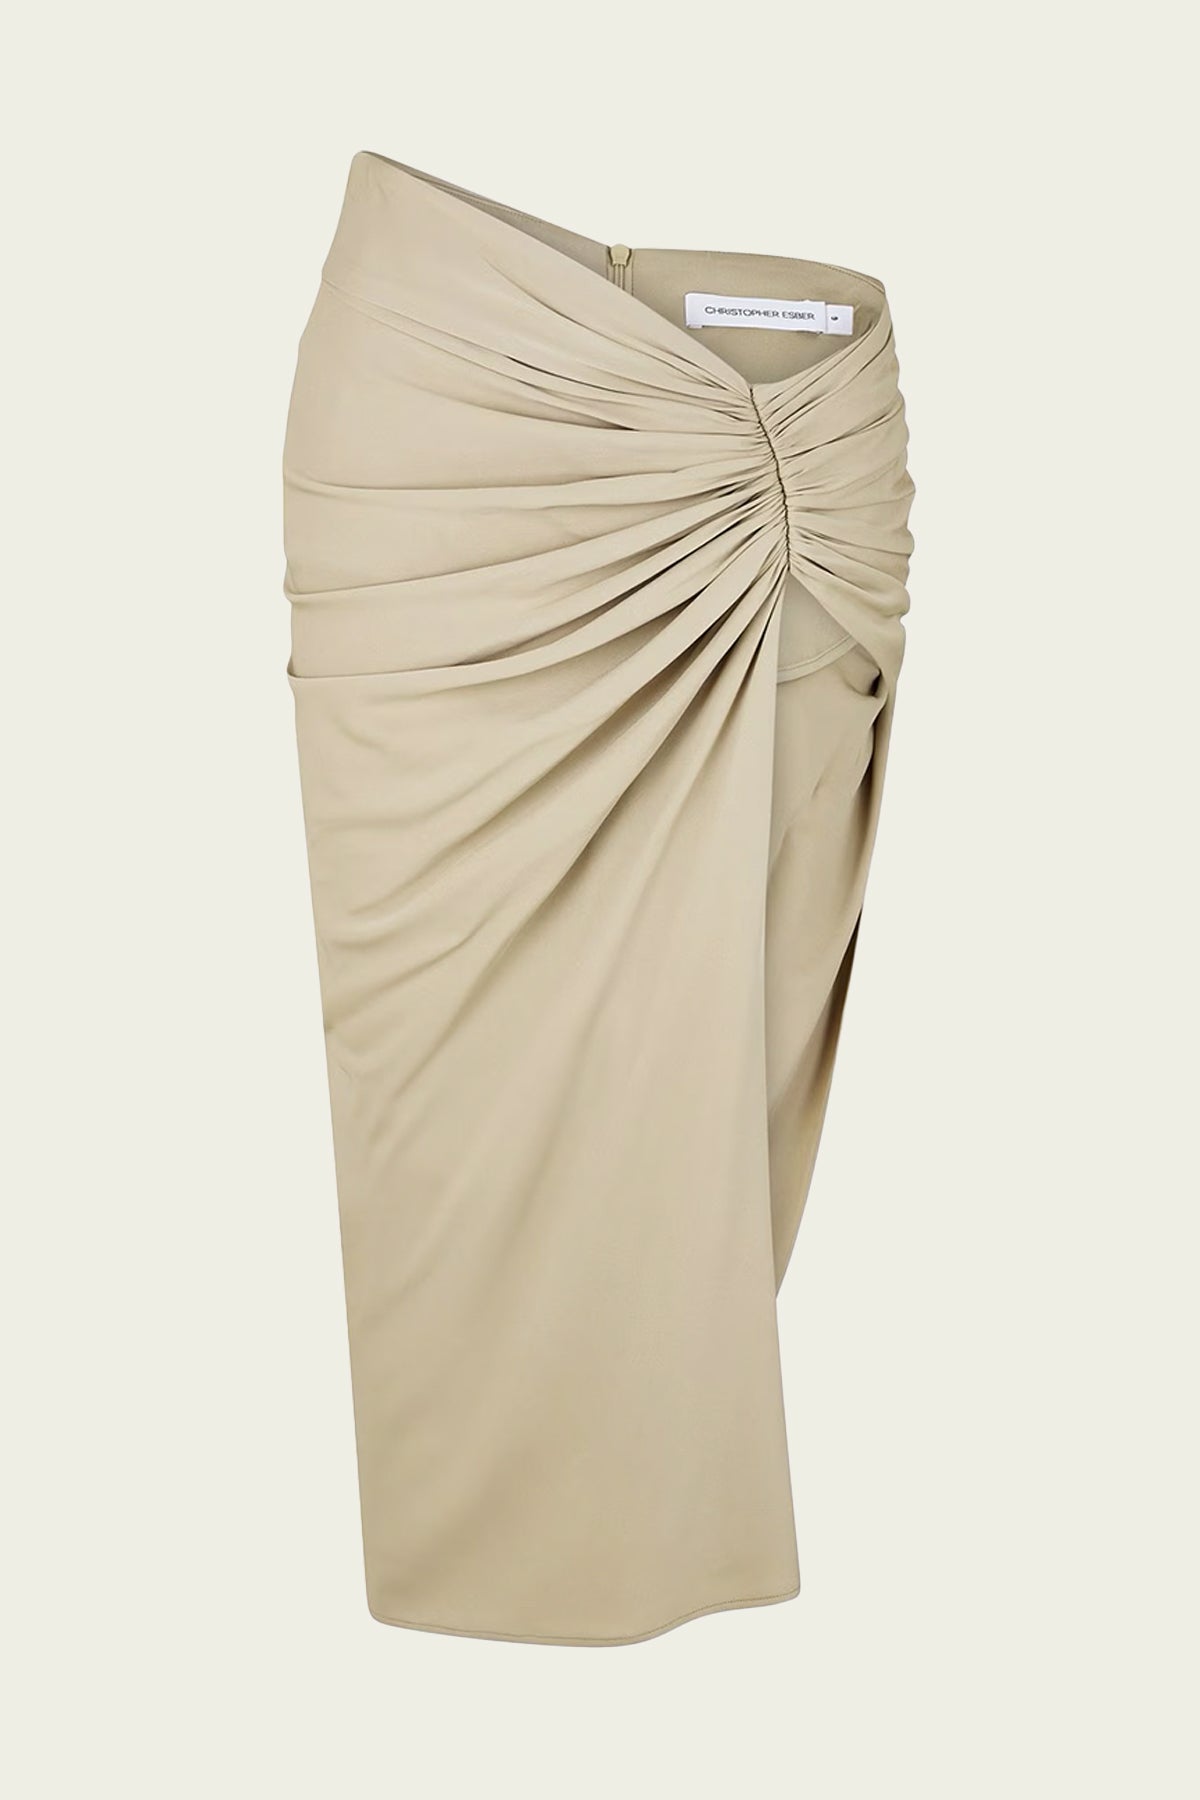 Euripides Ruched Skirt in Stone - shop-olivia.com